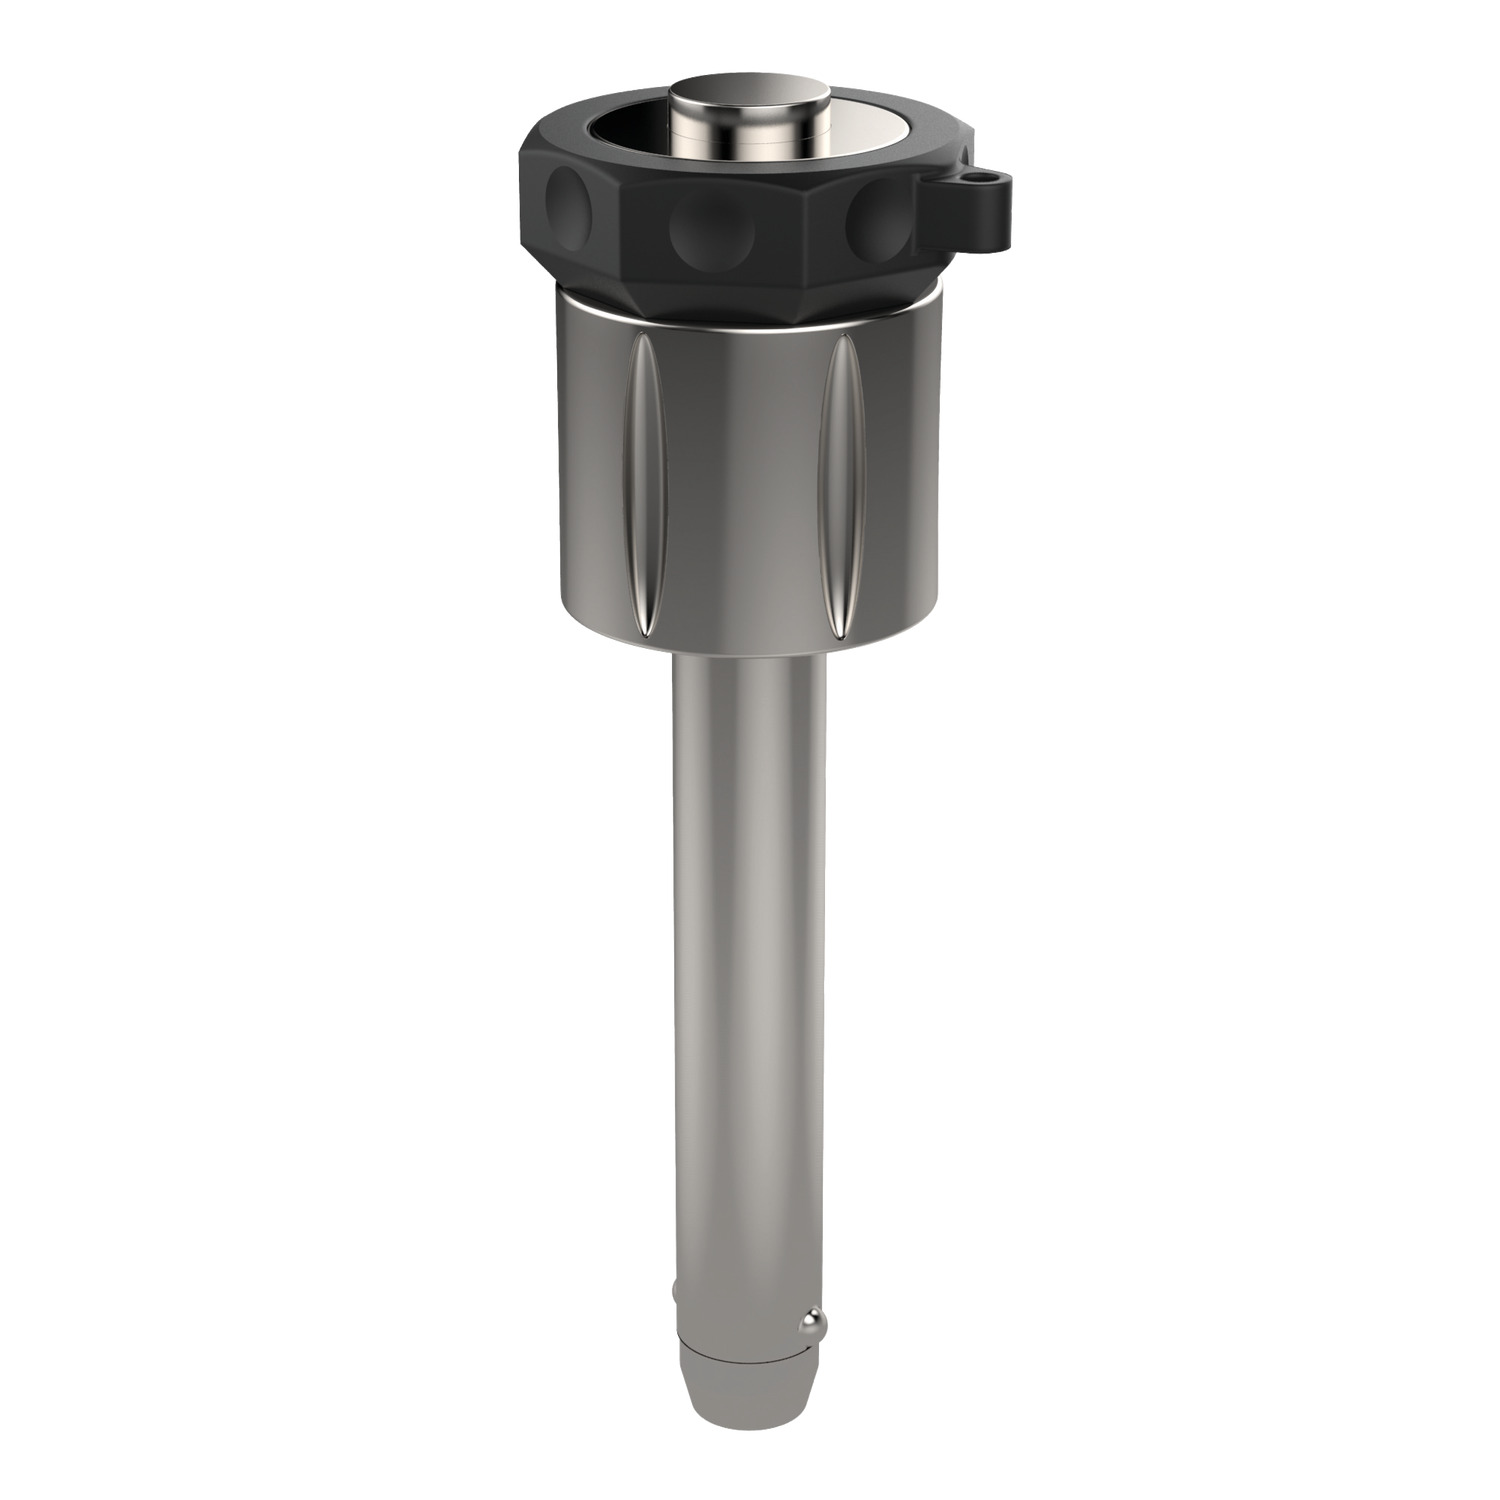 Ball Lock Pins - Single Acting Adjustable length, self locking, single acting ball lock pin made from stainless steel. AISI 630 version is available for extreme load capacity.